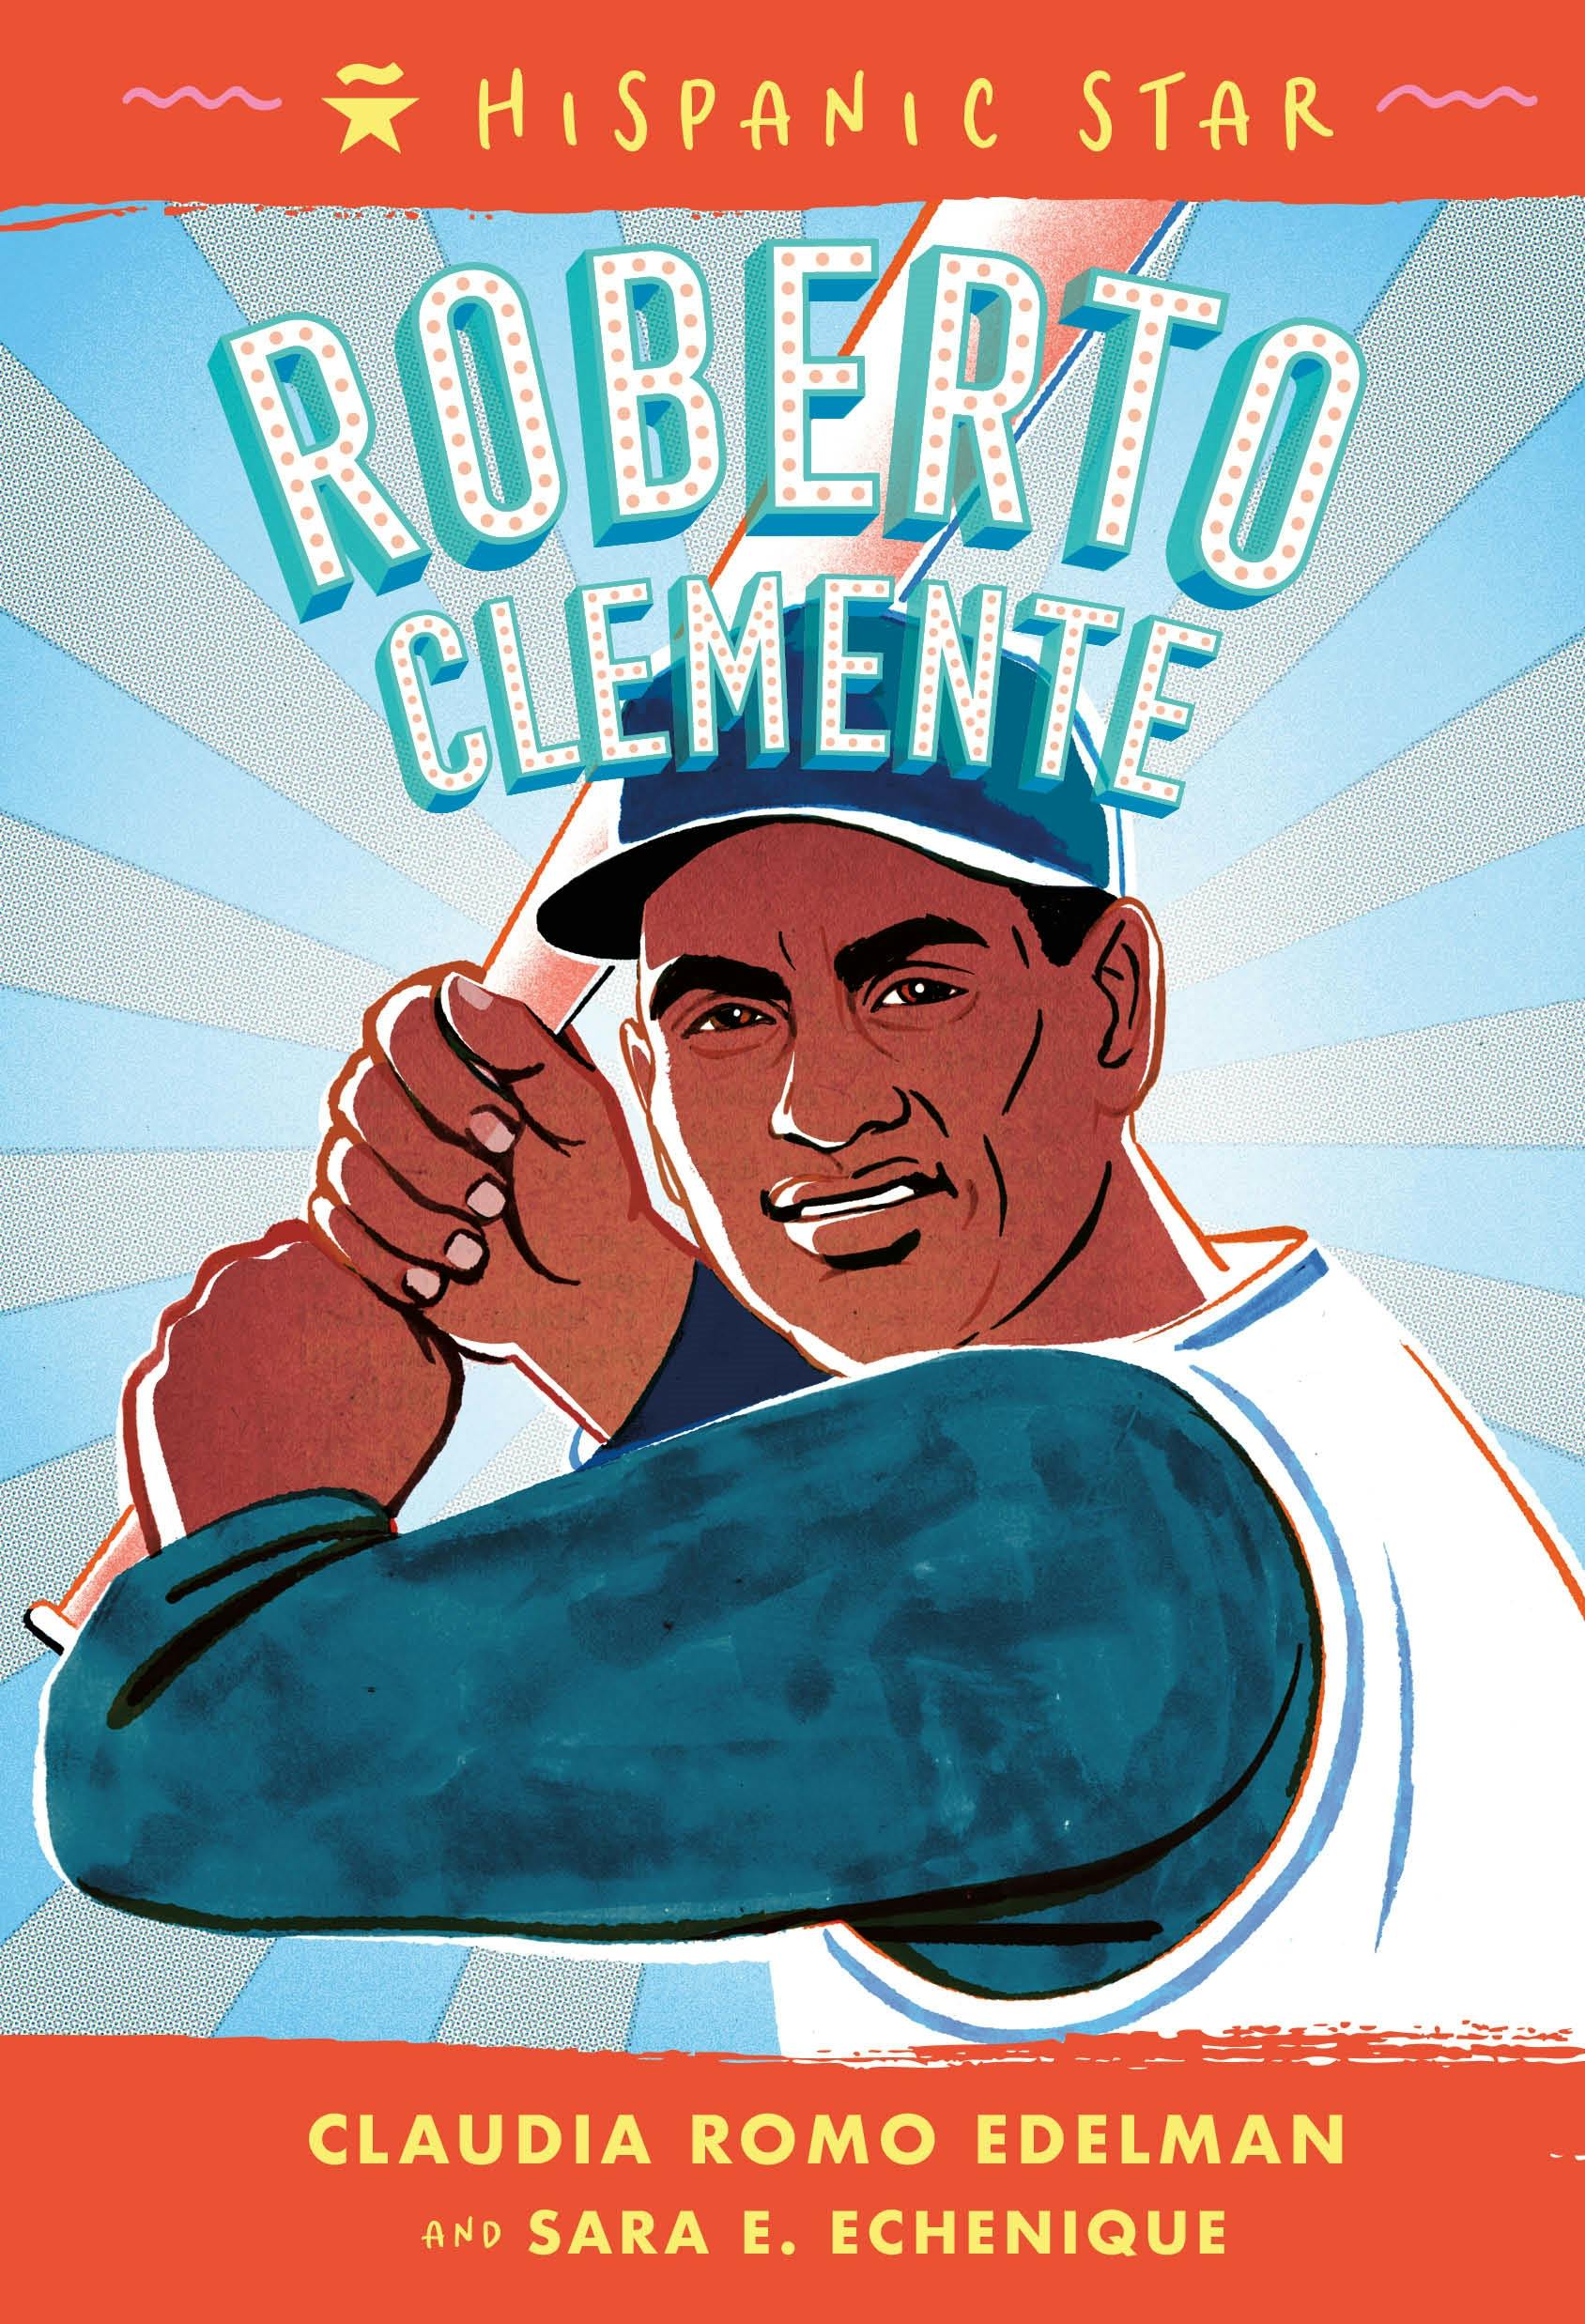 On this day in history, August 18, 1934, baseball star Roberto